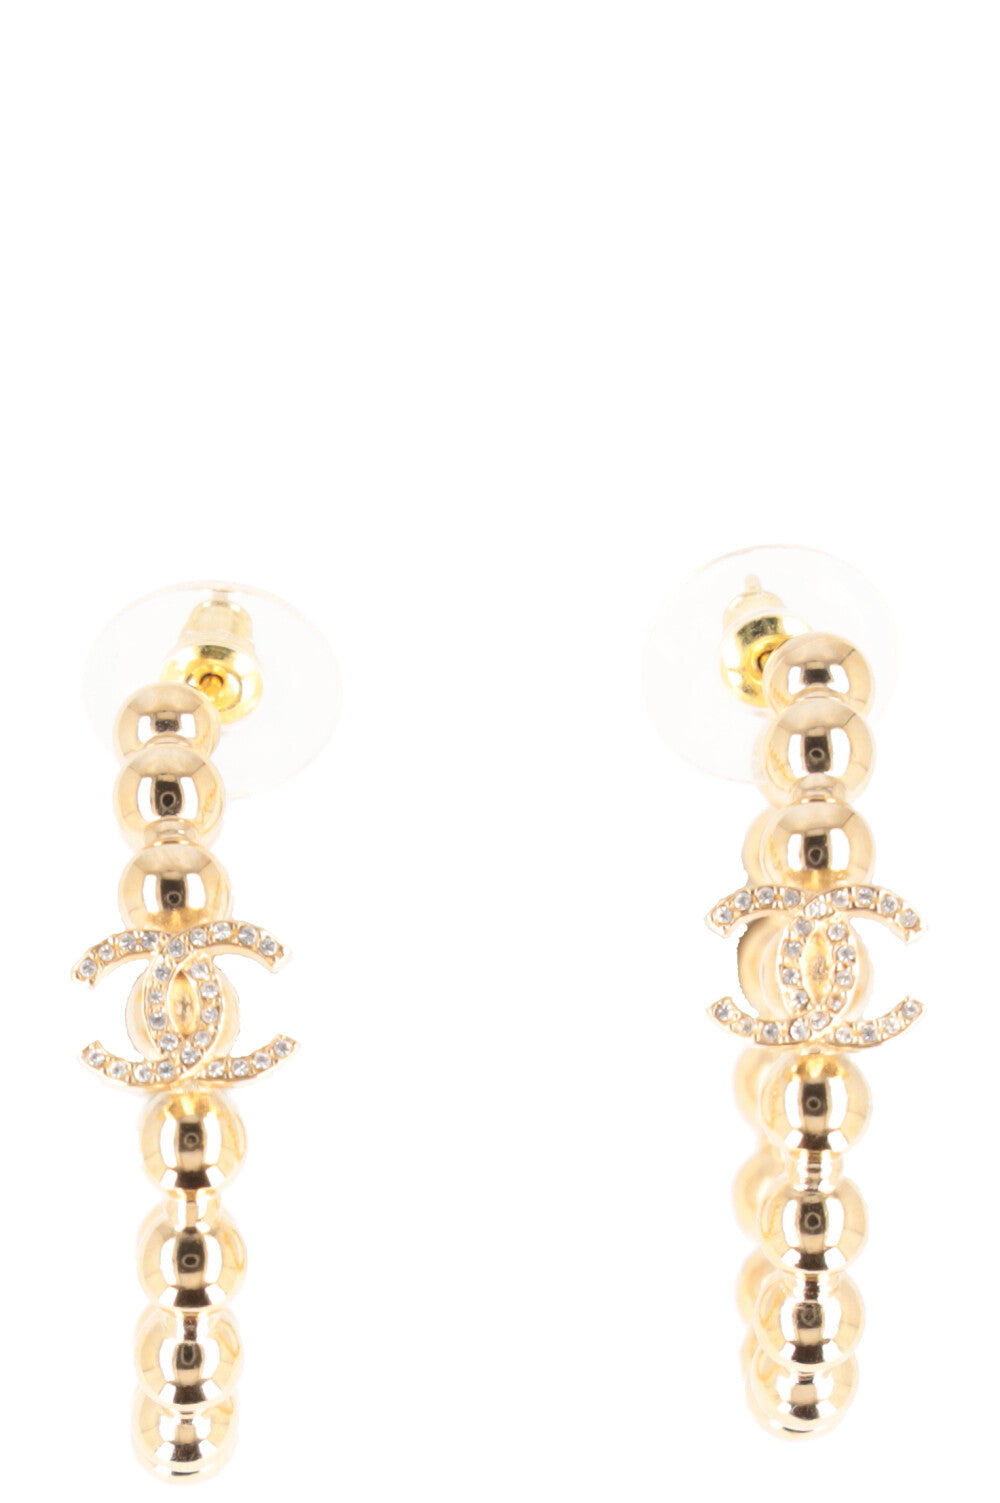 New Chanel Earrings from Switch! • BrightonTheDay